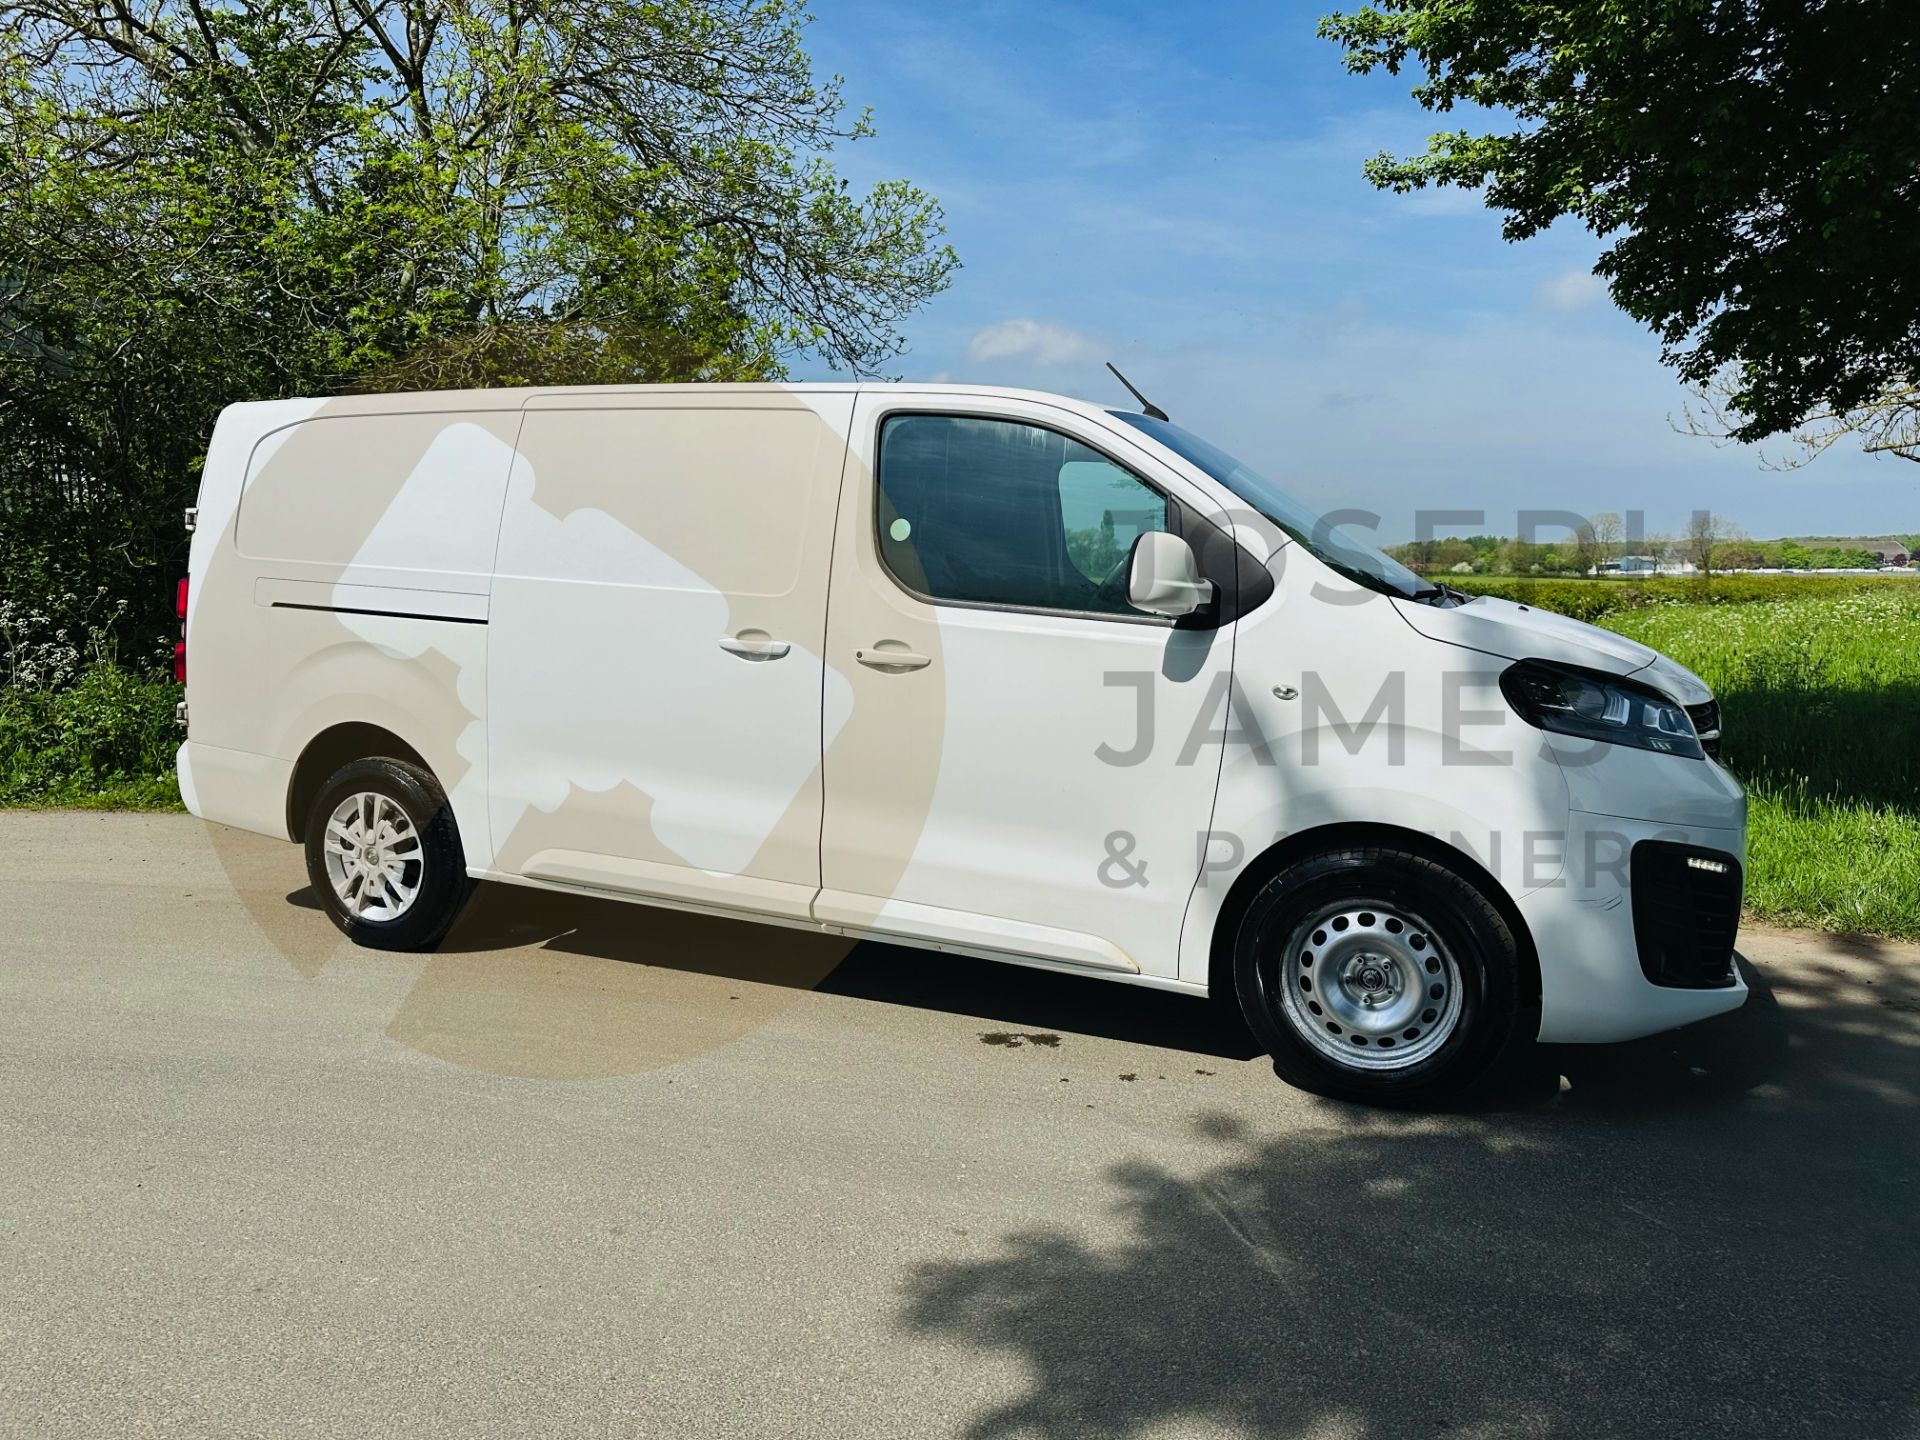 (On Sale) VAUXHALL VIVARO 2900 S/S *SPORTIVE EDITION* EXTENDED FRAME (BLUEINJECTION) - 2020 MODEL